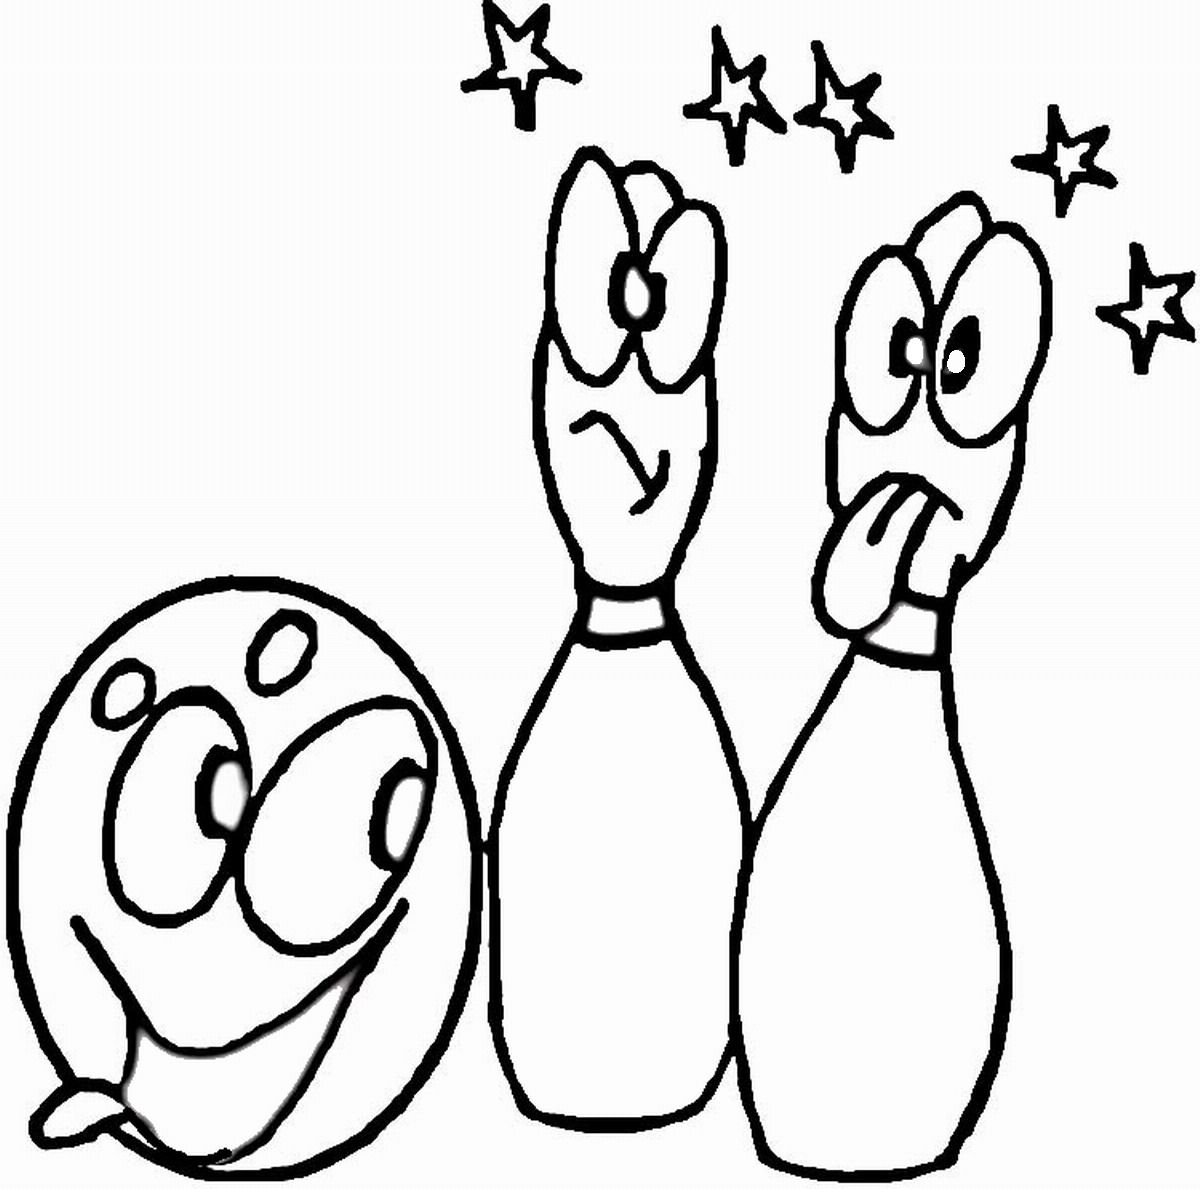 Bowling Coloring Pages - Coloring Home